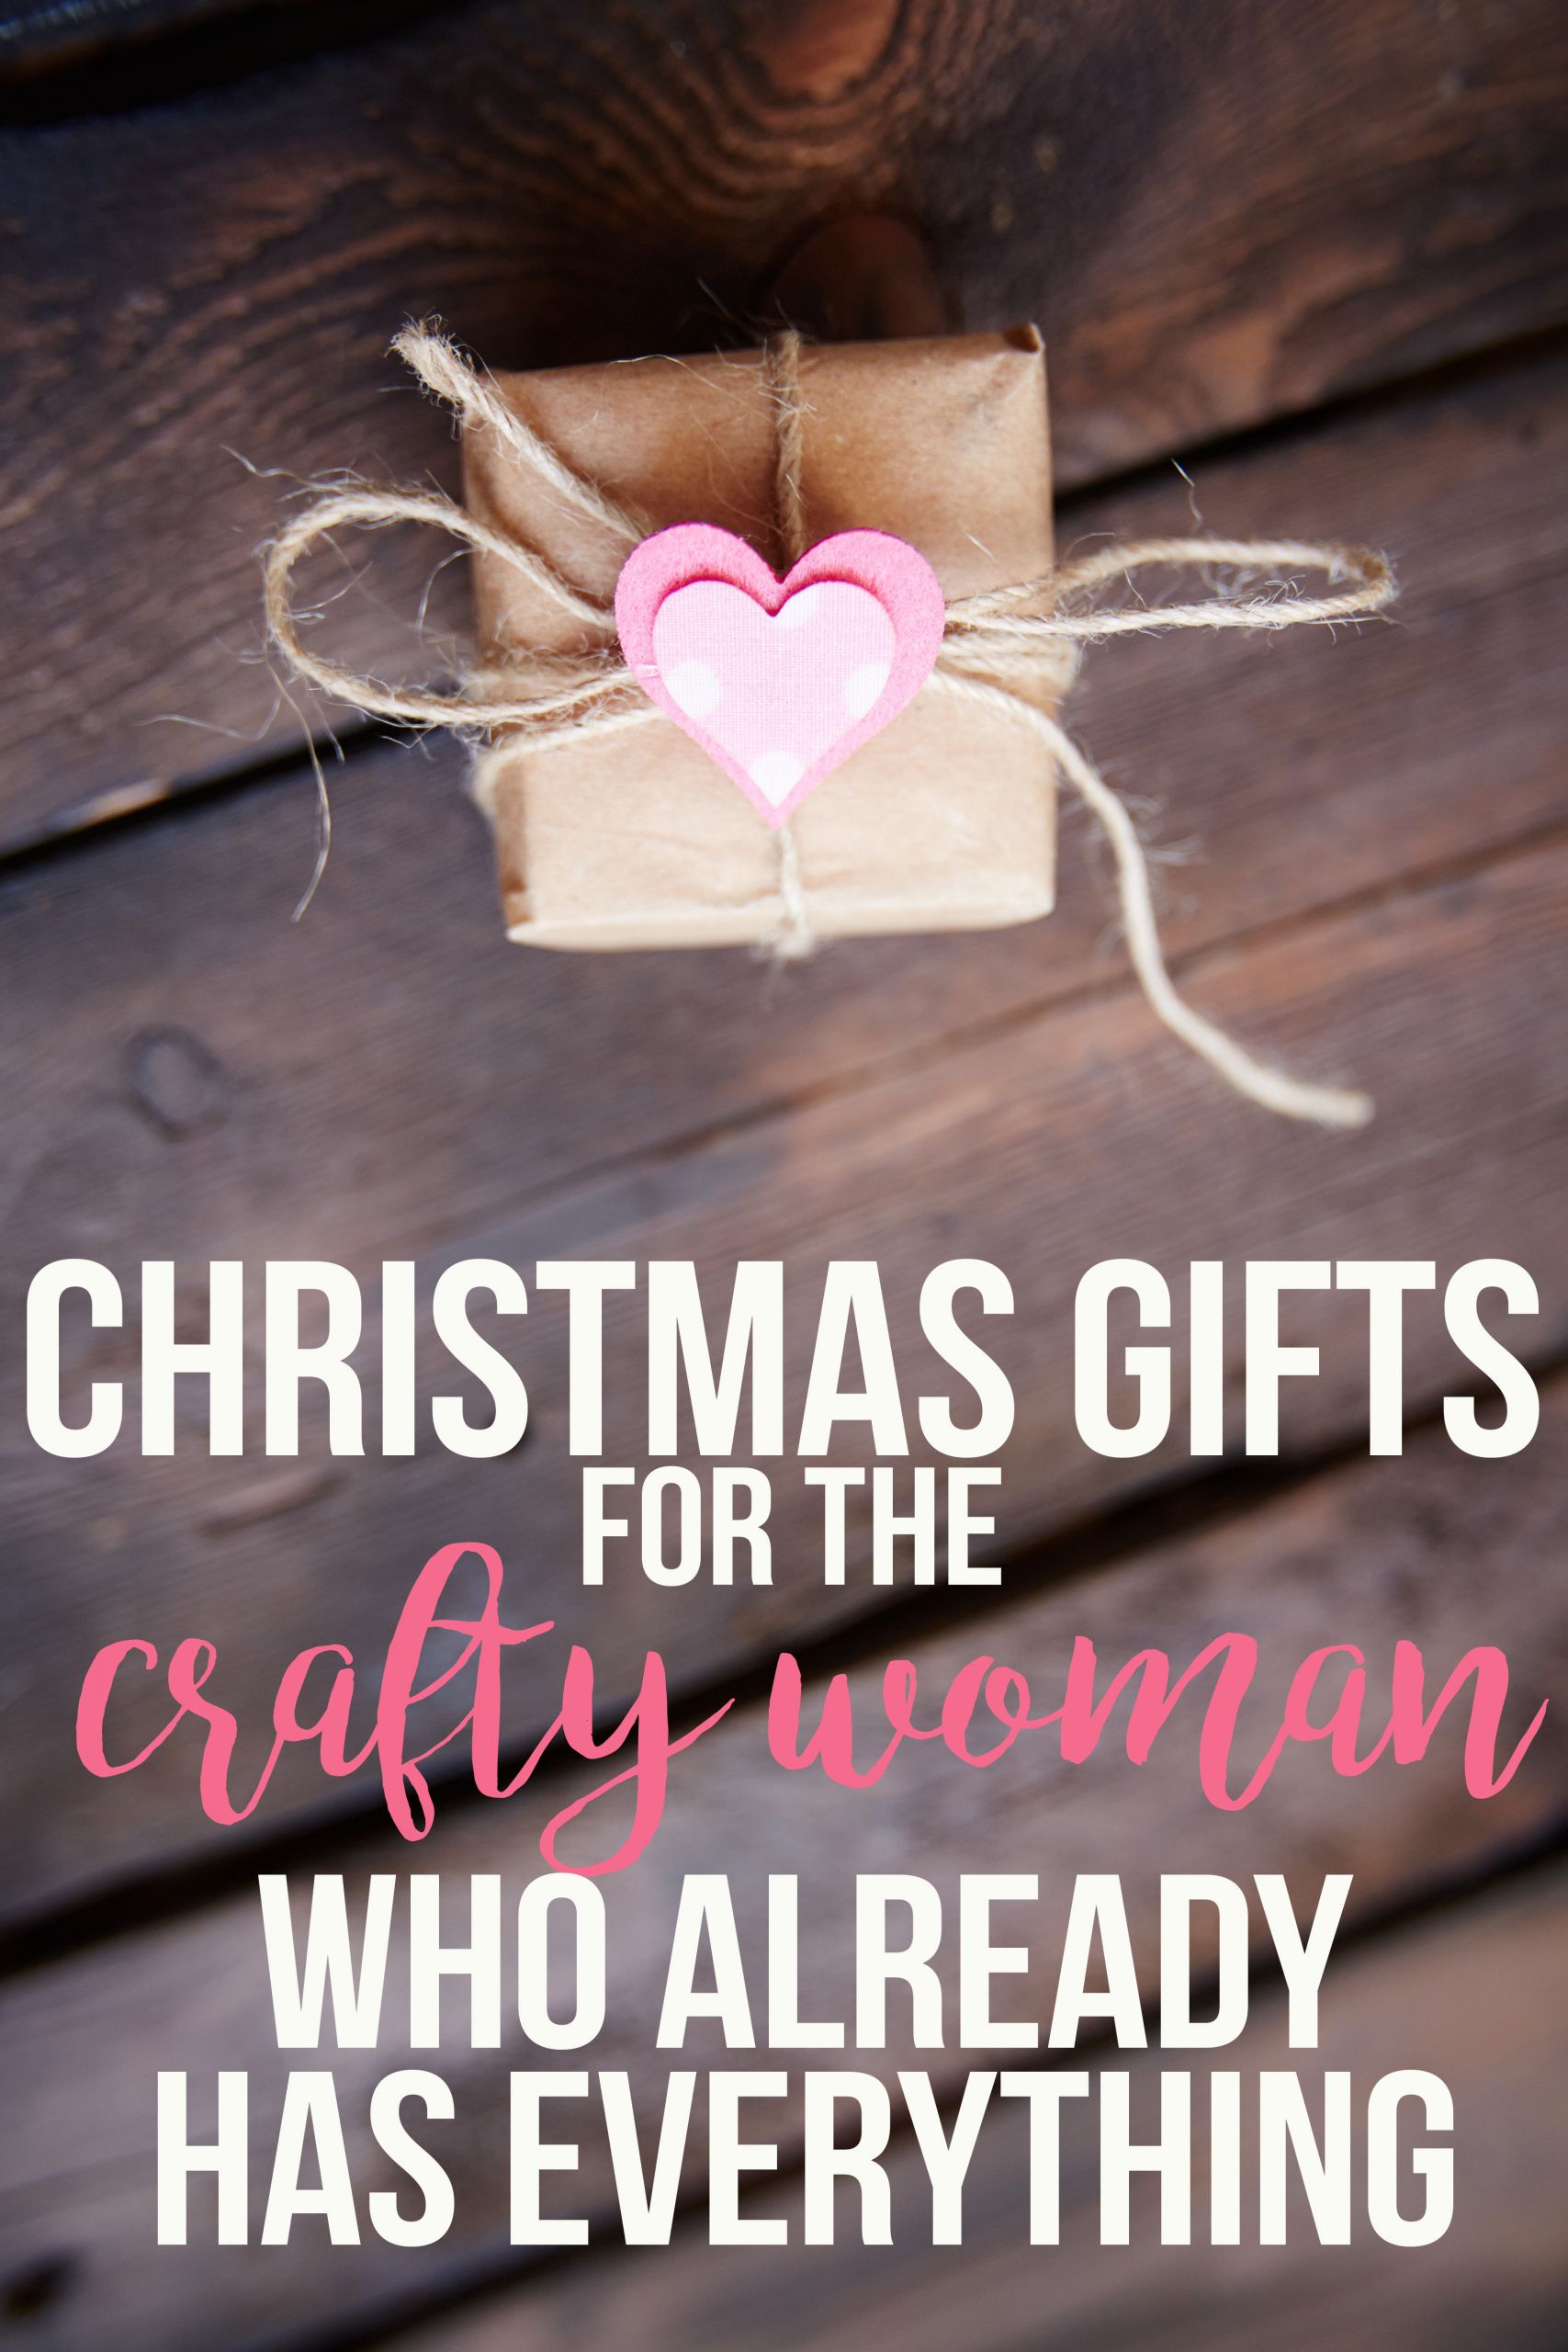 Christmas Gift Ideas For Woman Who Has Everything
 Christmas Gifts For The Crafty Woman Who Has Everything